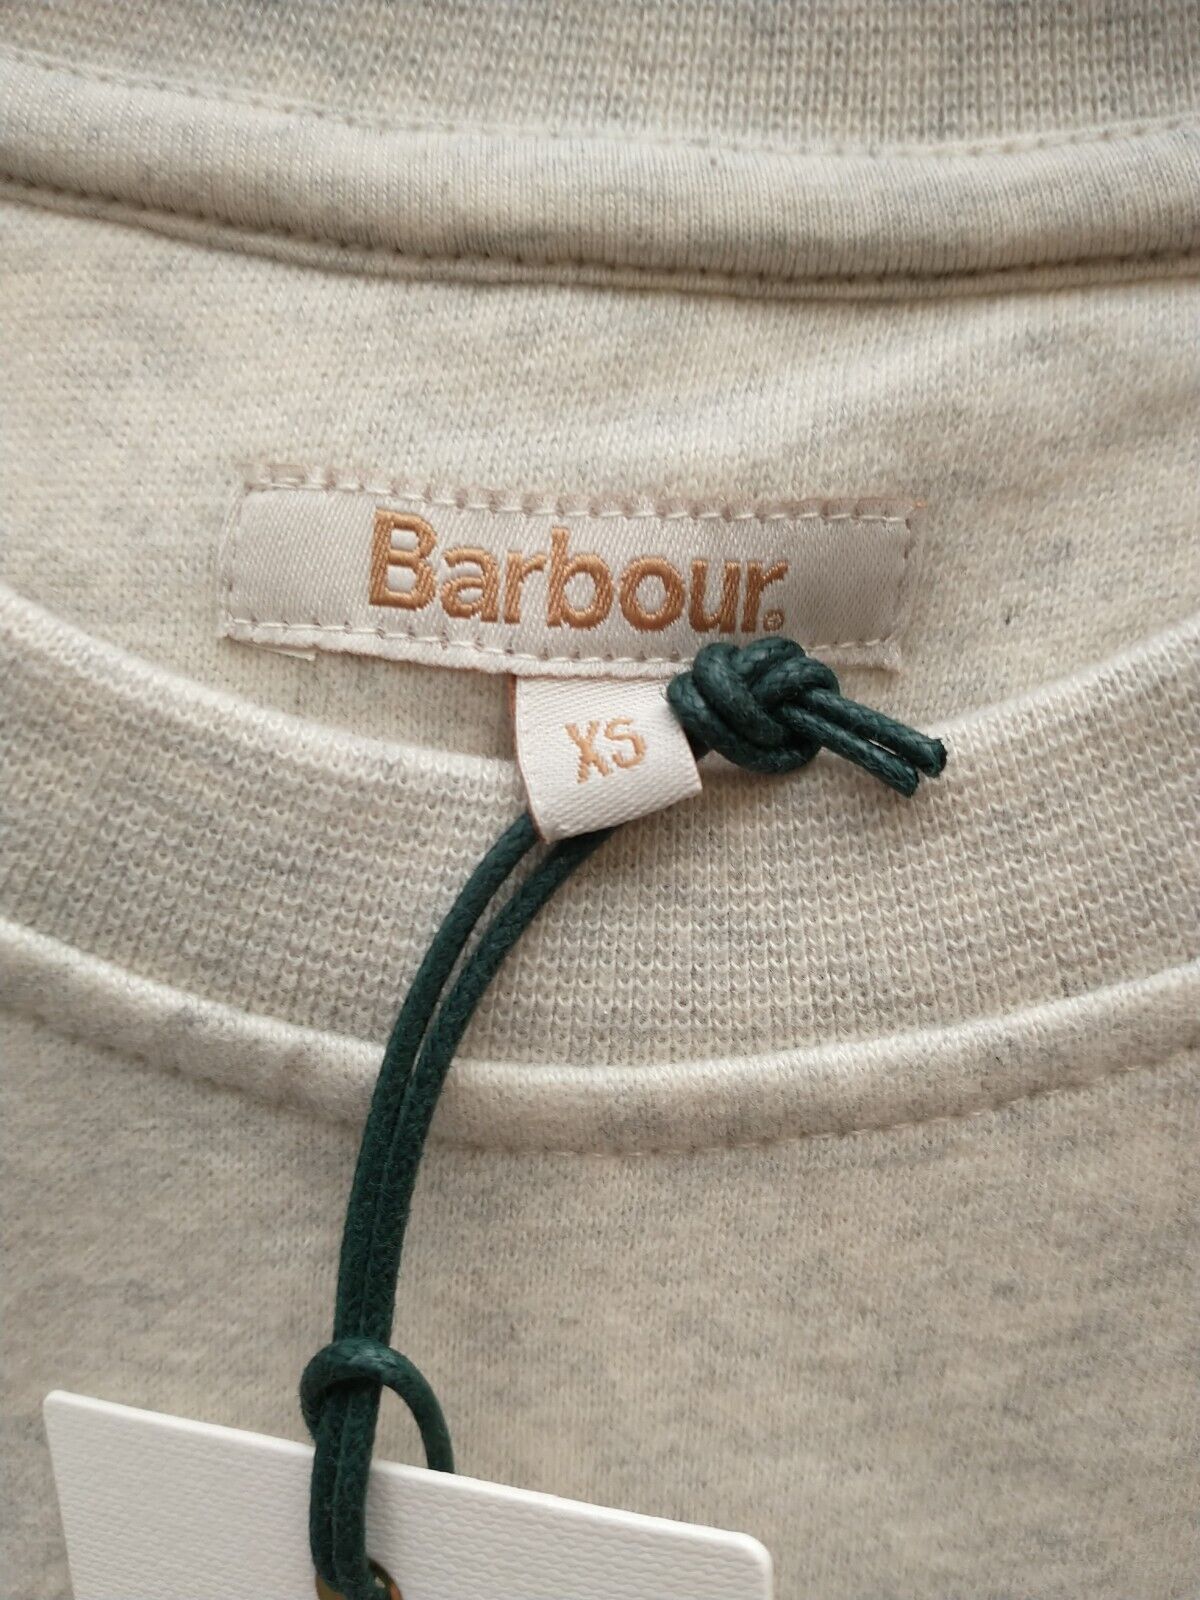 Barbour Rosie Relaxed Lounge Crew - Ecru Marl Size XS